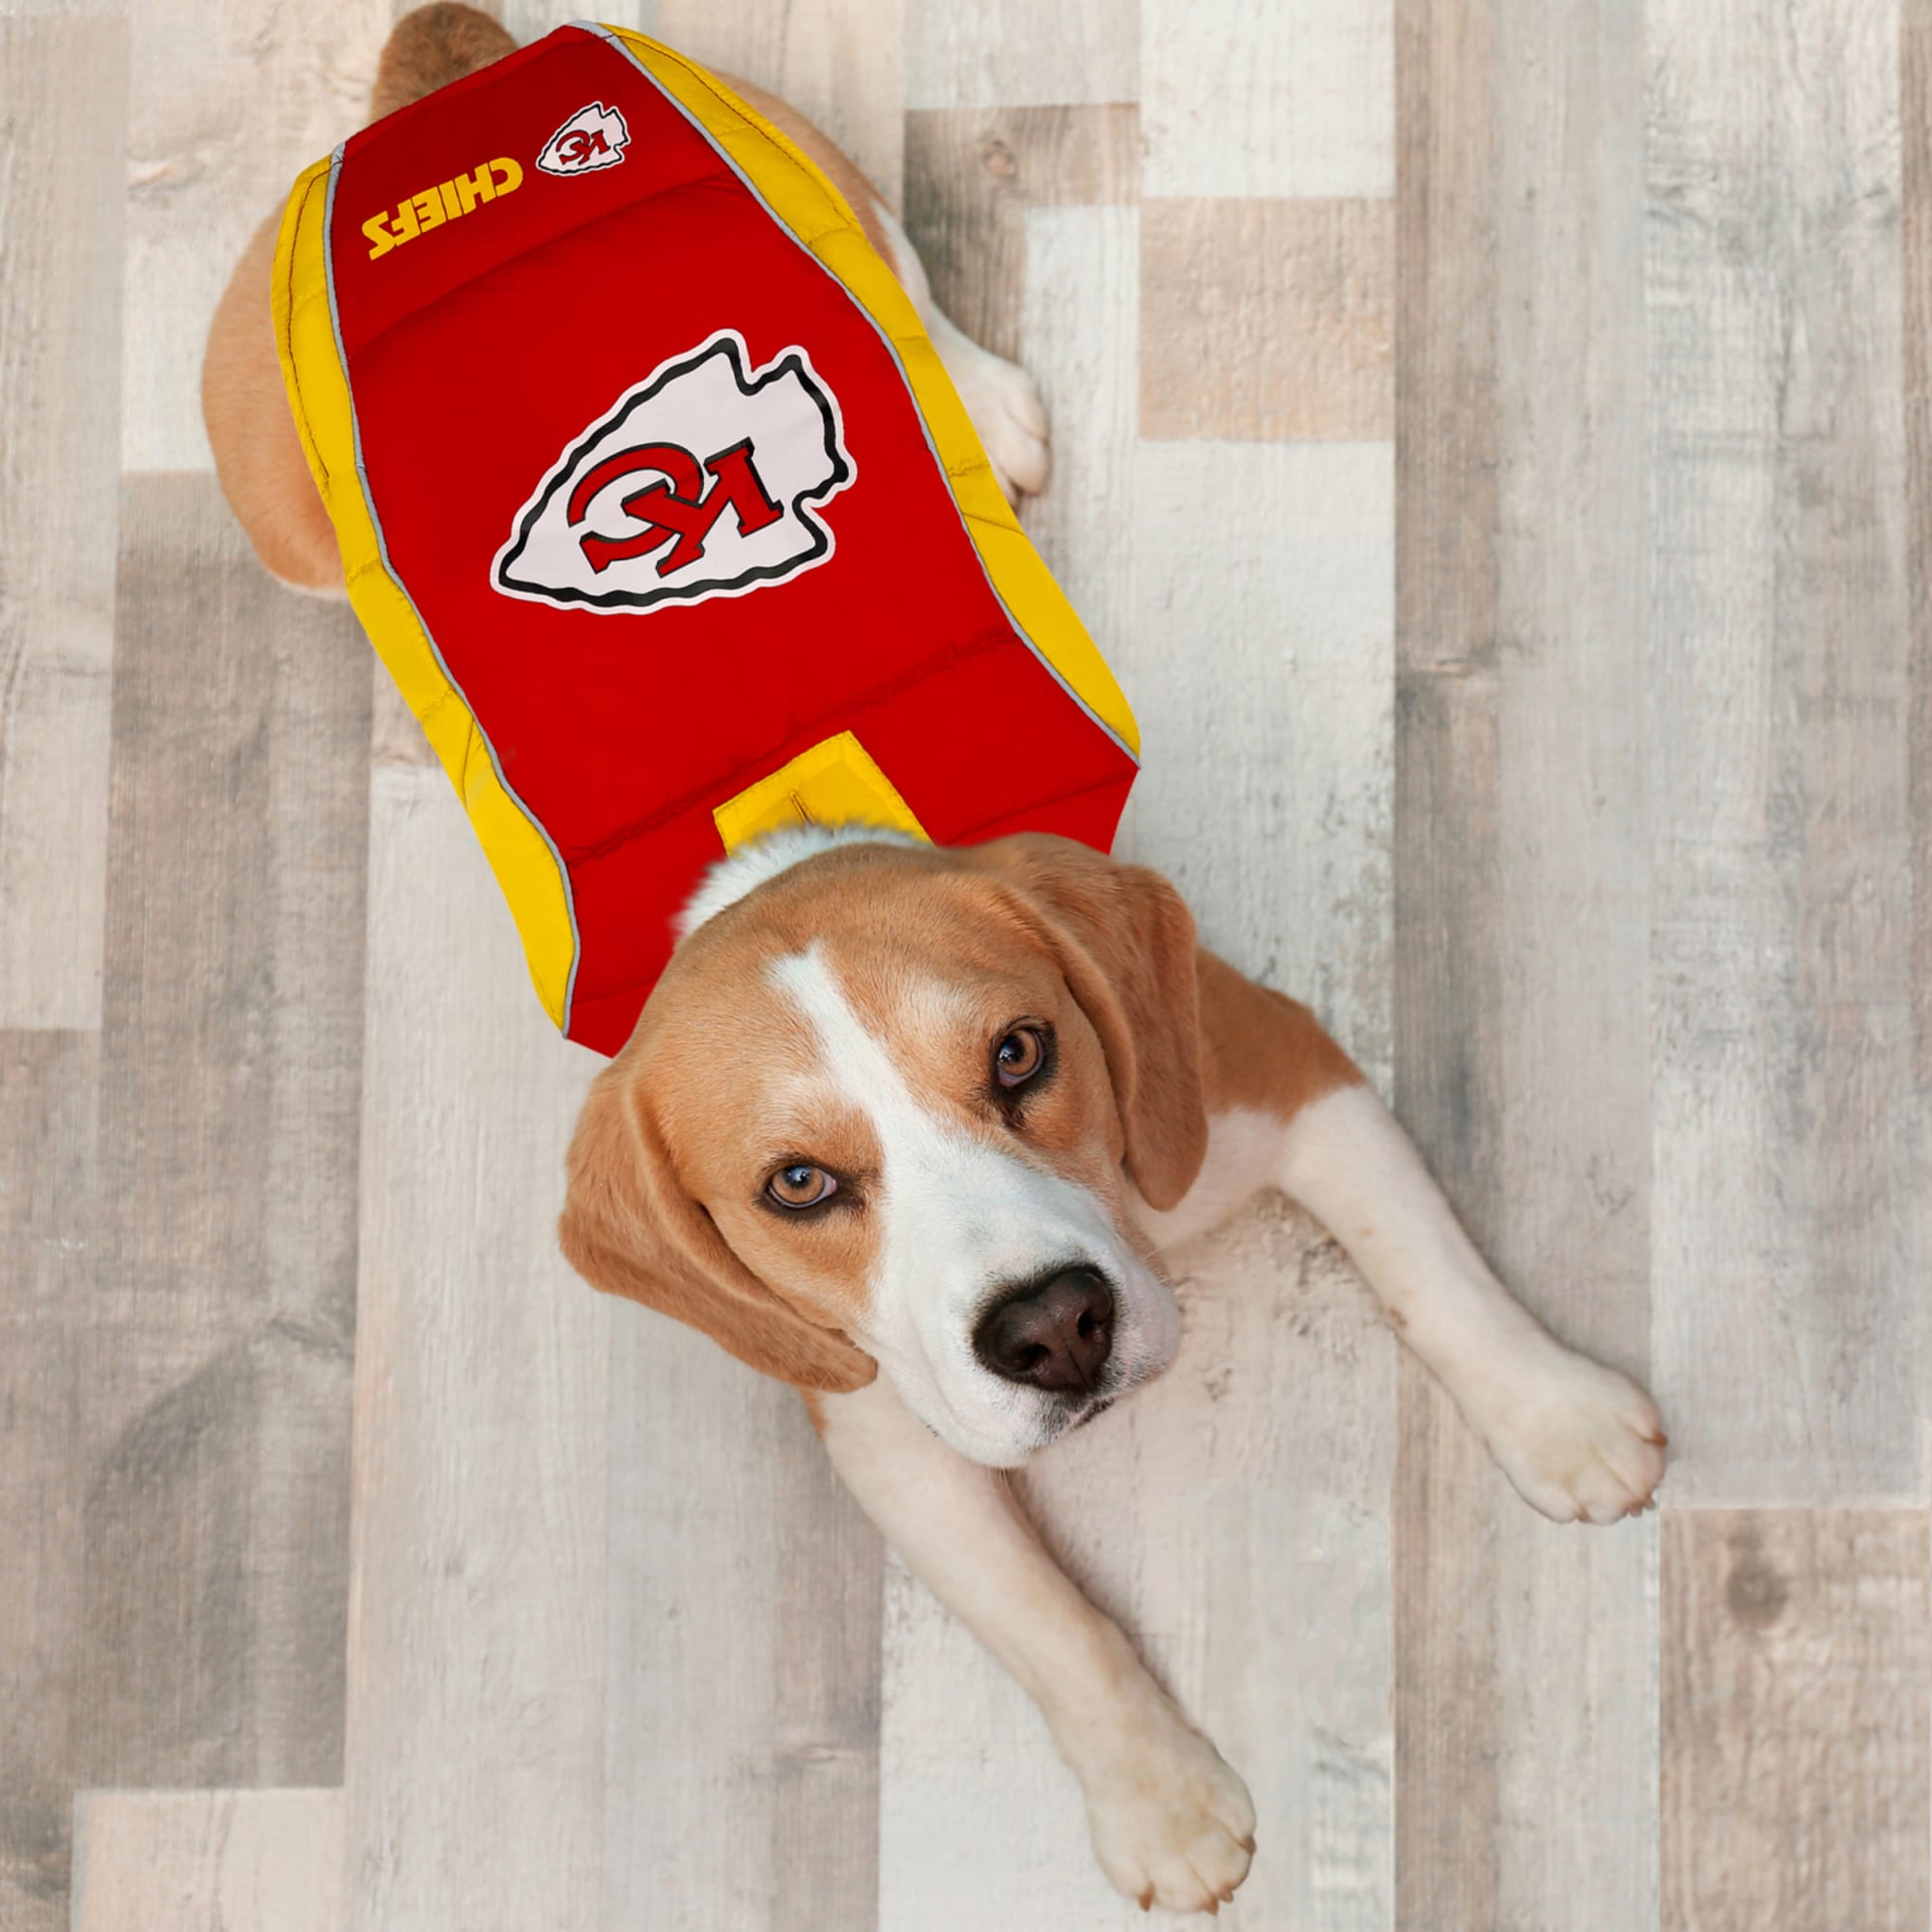 kc chiefs jersey for dogs